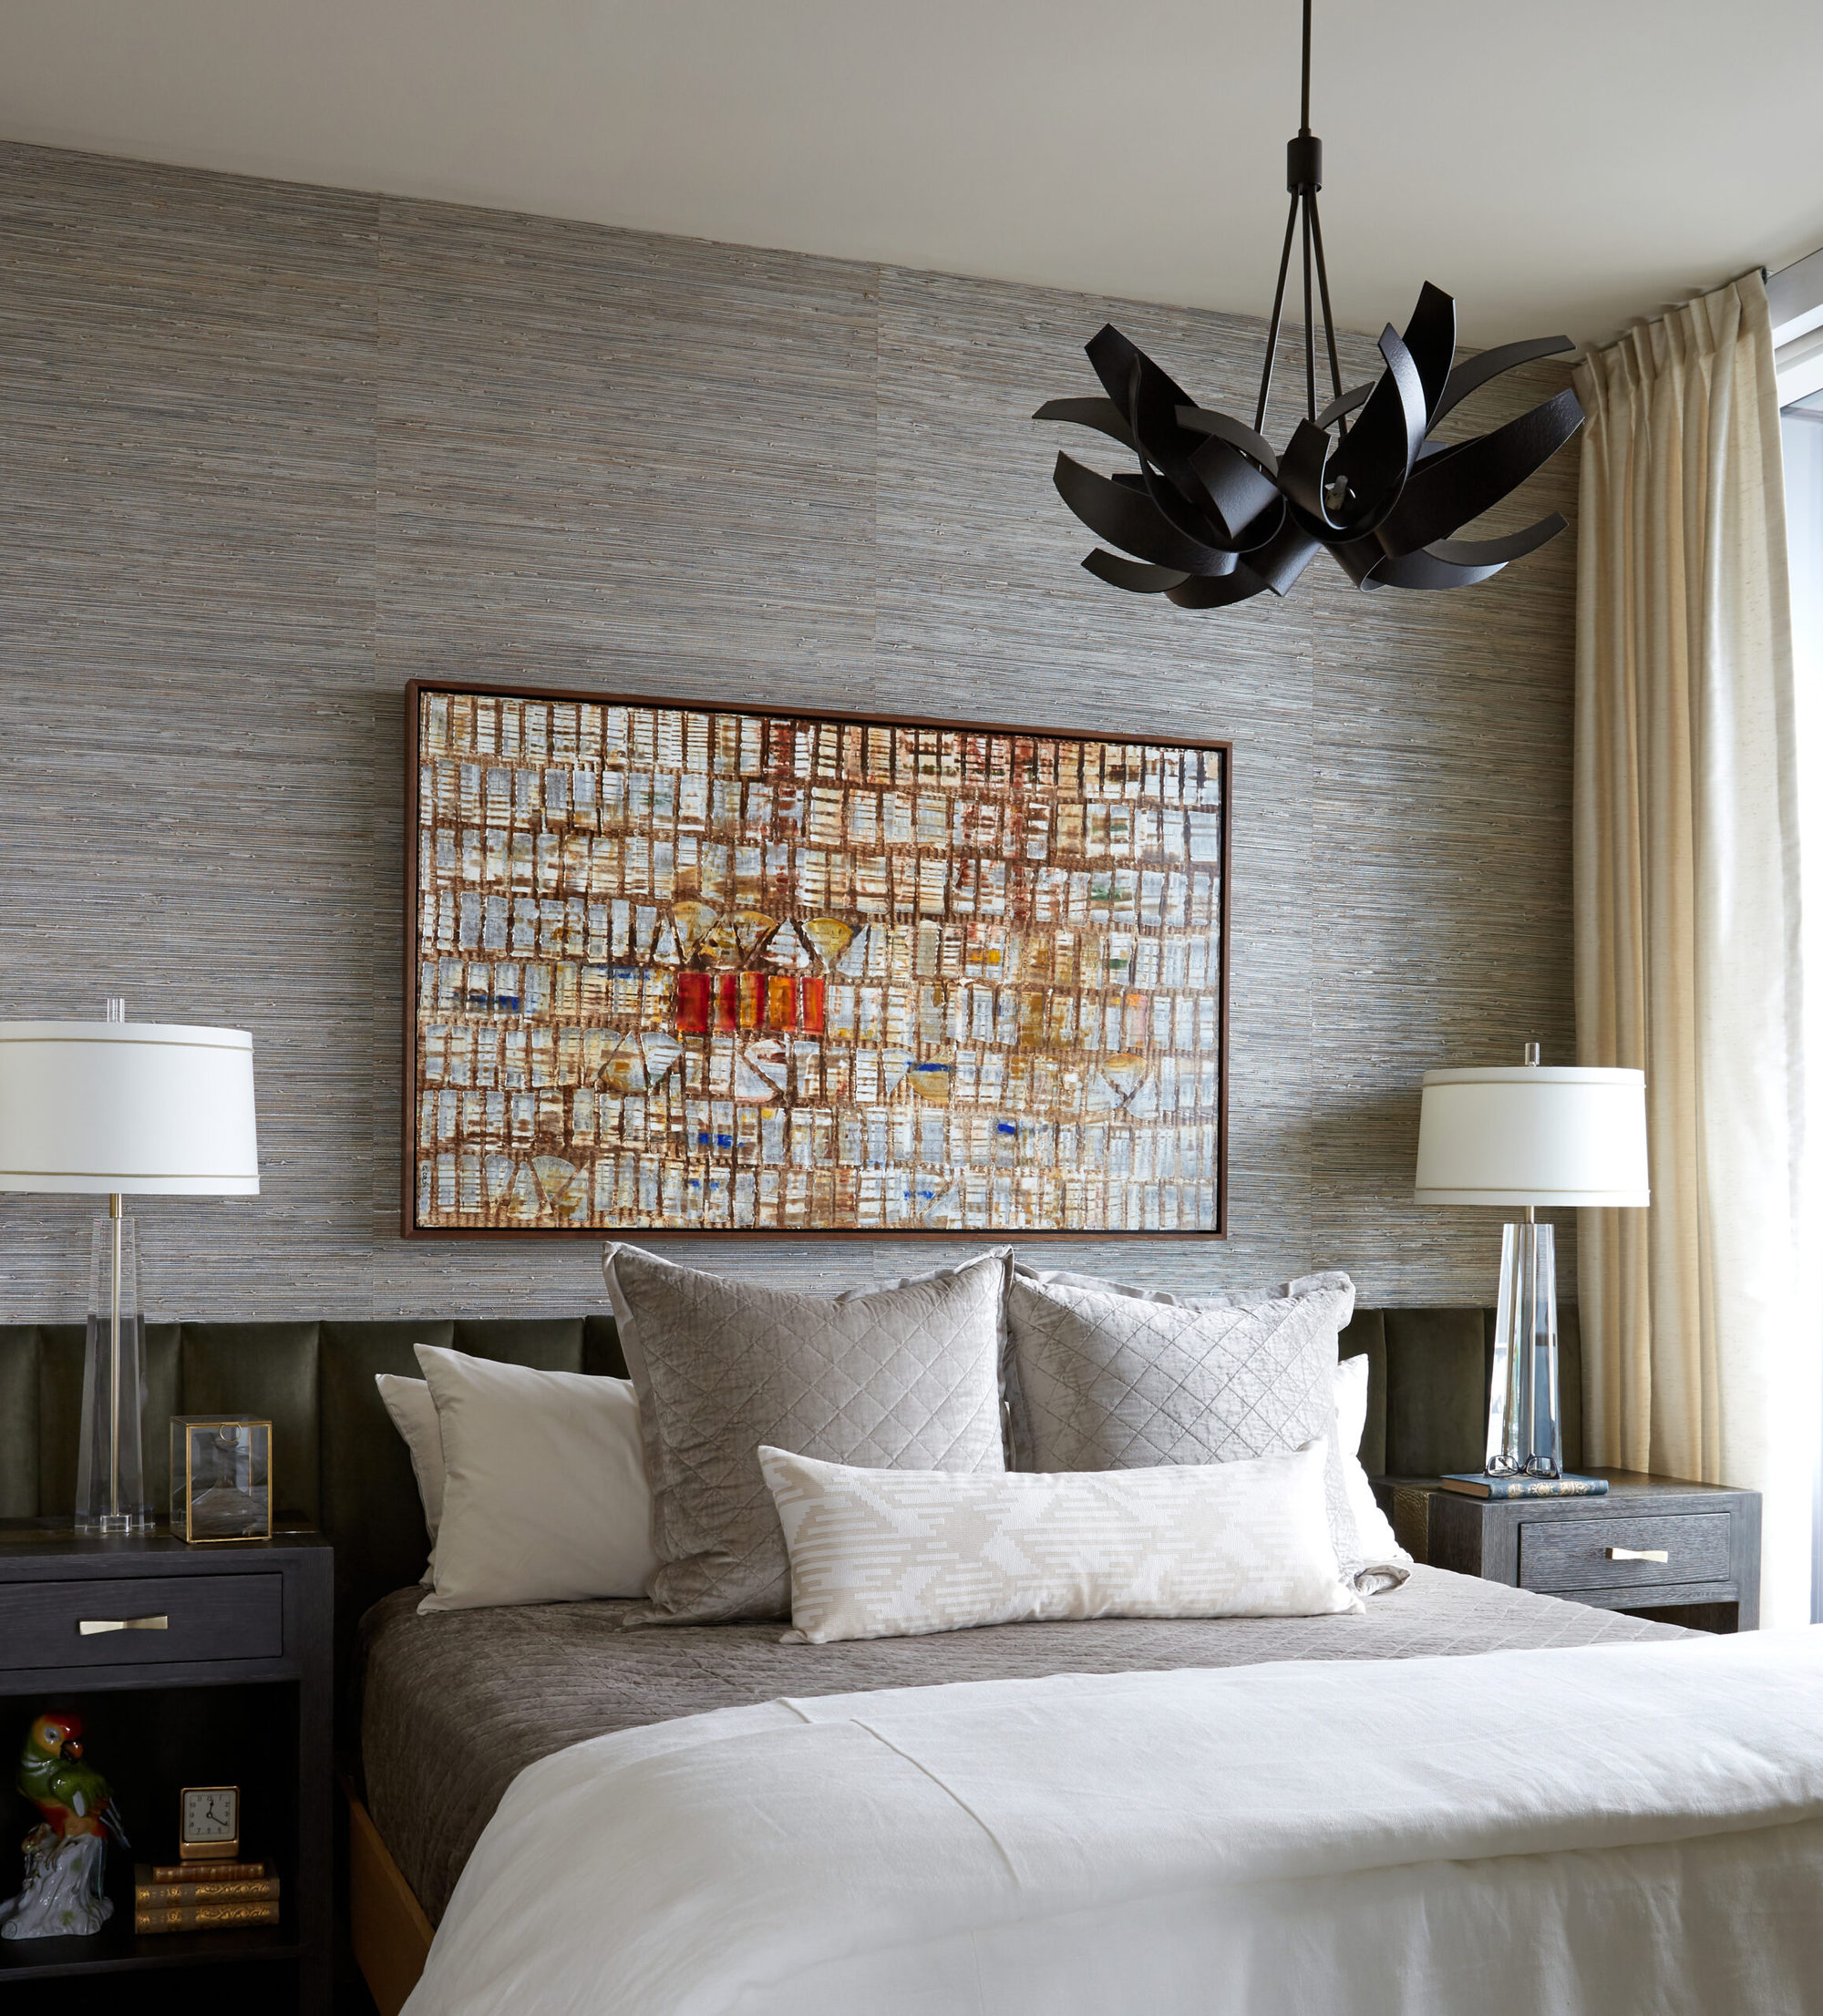 Cozy bedroom with statement art. Statement chandelier in bedroom. Textured accents. Upholstered headboard the length of the wall.